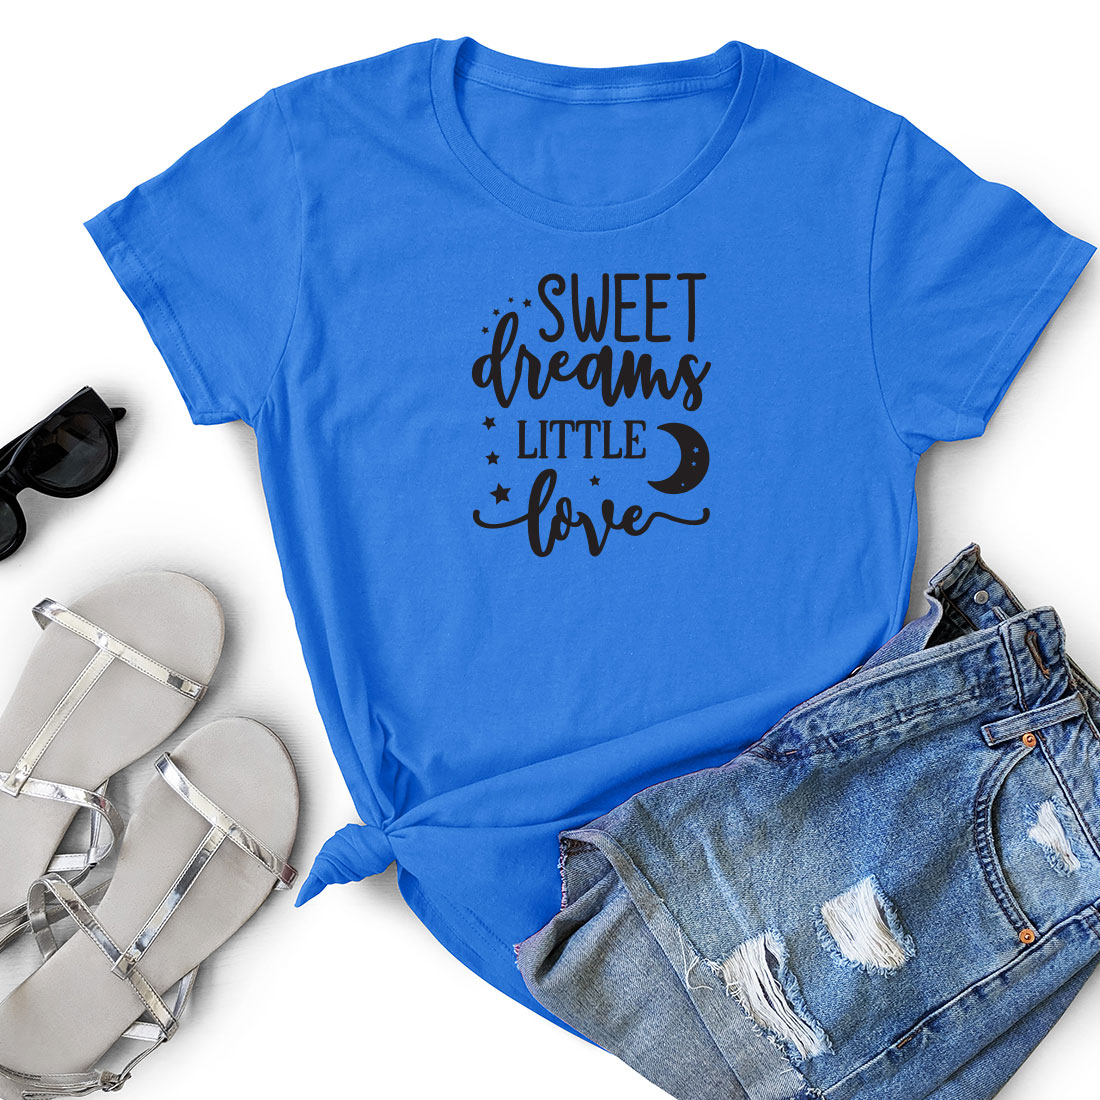 T - shirt that says sweet dreams little love.